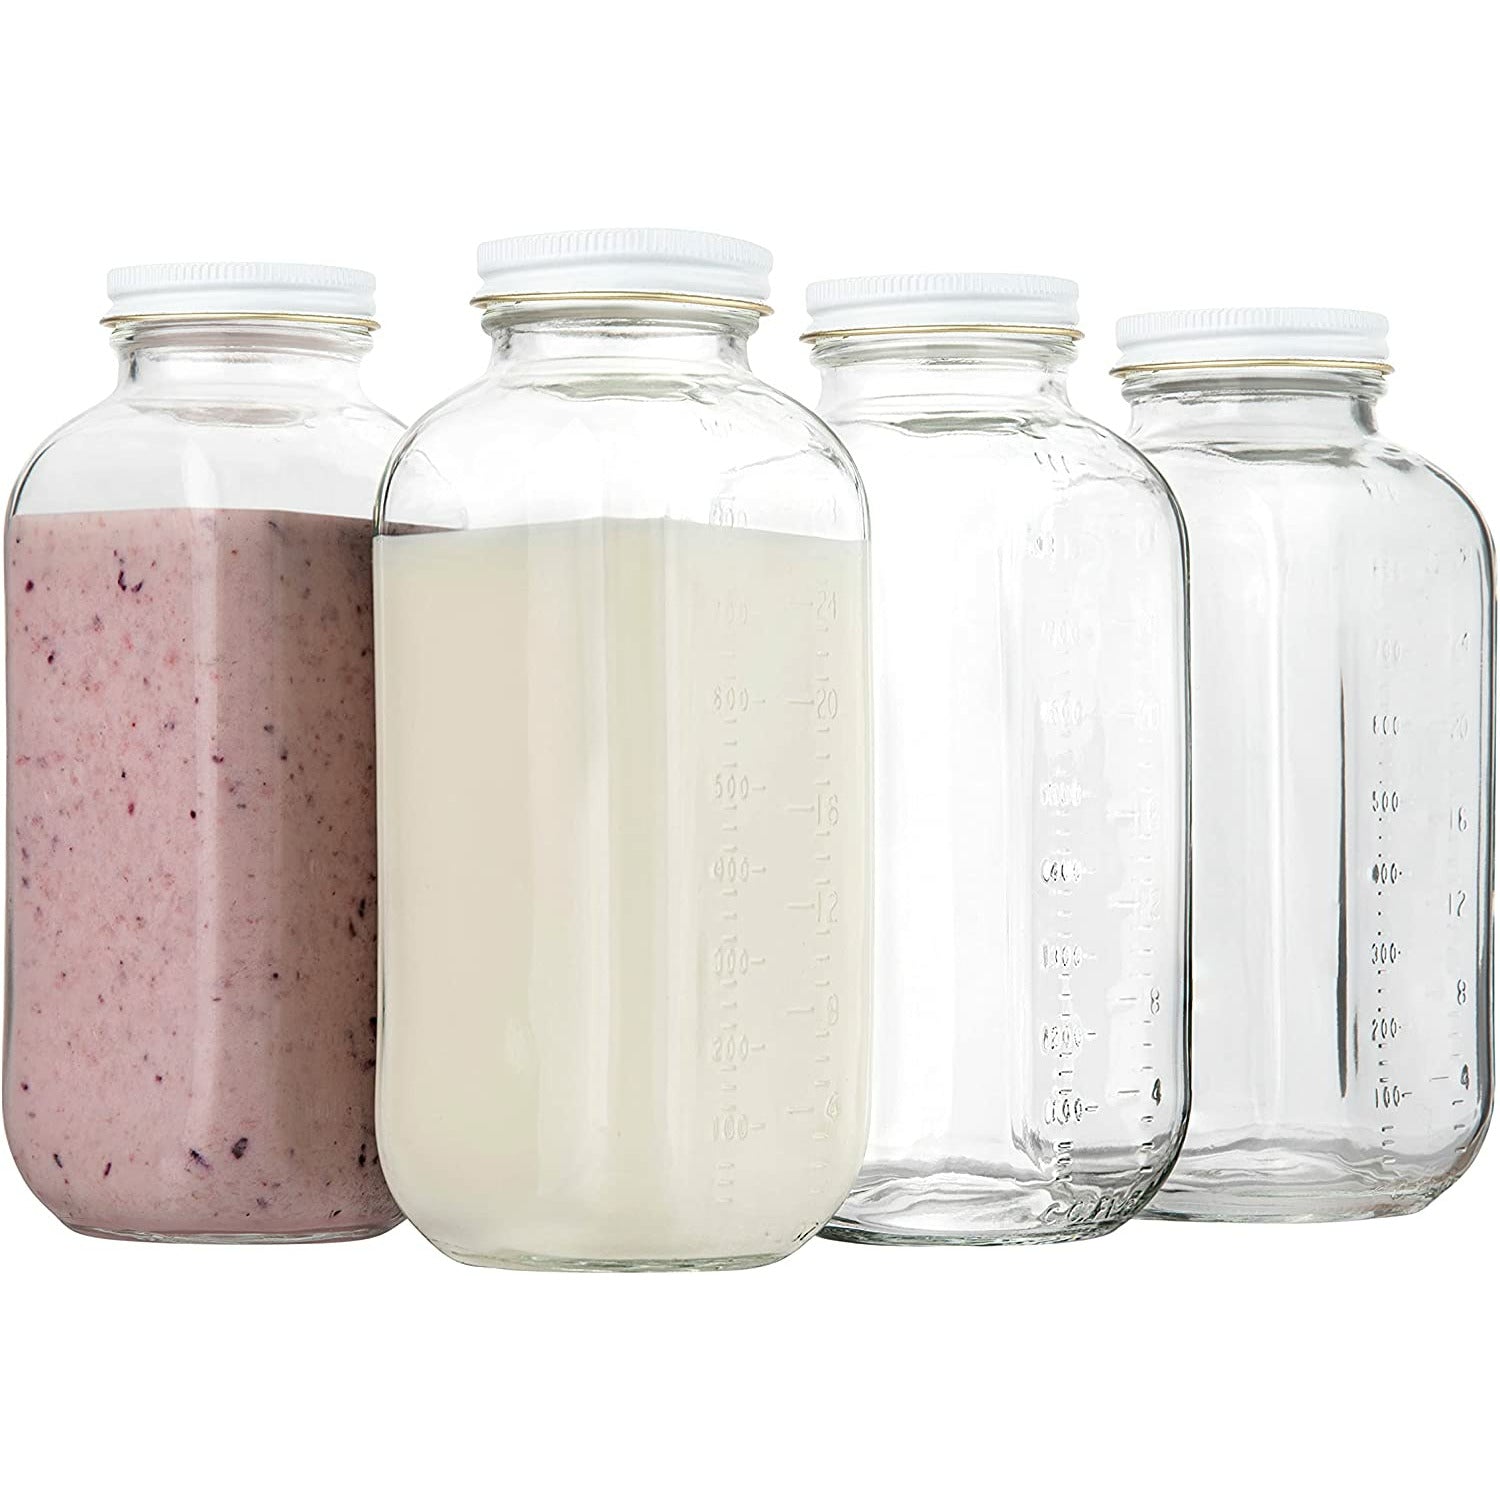 Kitchentoolz 32oz Square Glass Milk Bottle with White Metal Airtight Lids - Vintage Reusable Milk Jugs - Dairy Drinking Containers for Milk